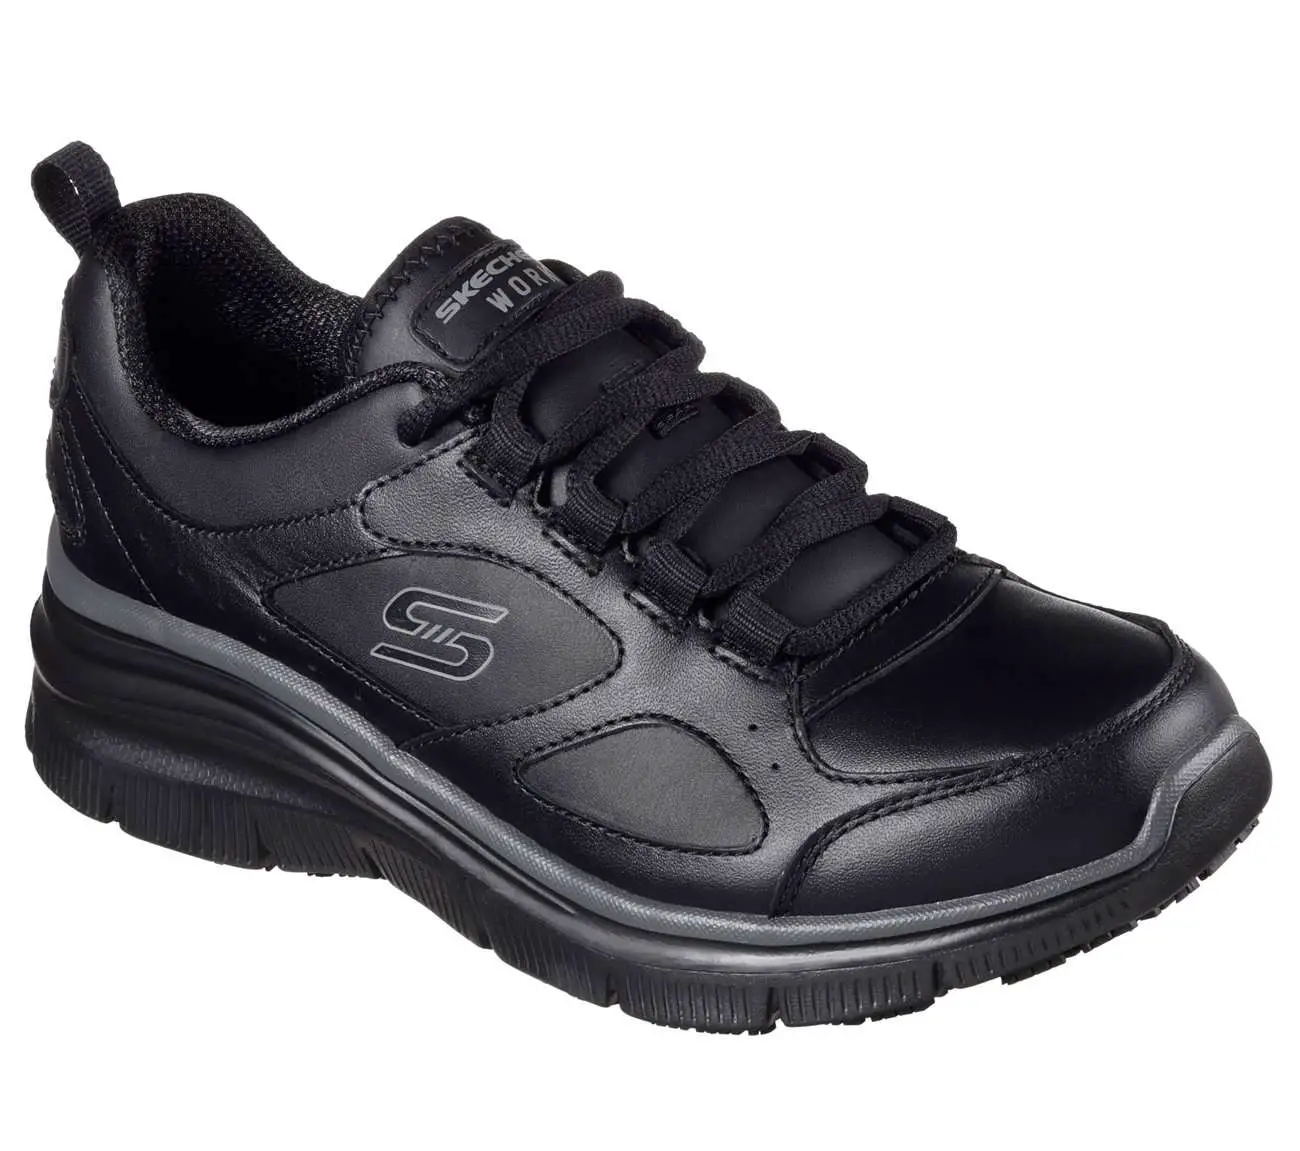 Buy SKECHERS Work Relaxed Fit: Carrolton SR Non Slip Shoes ...